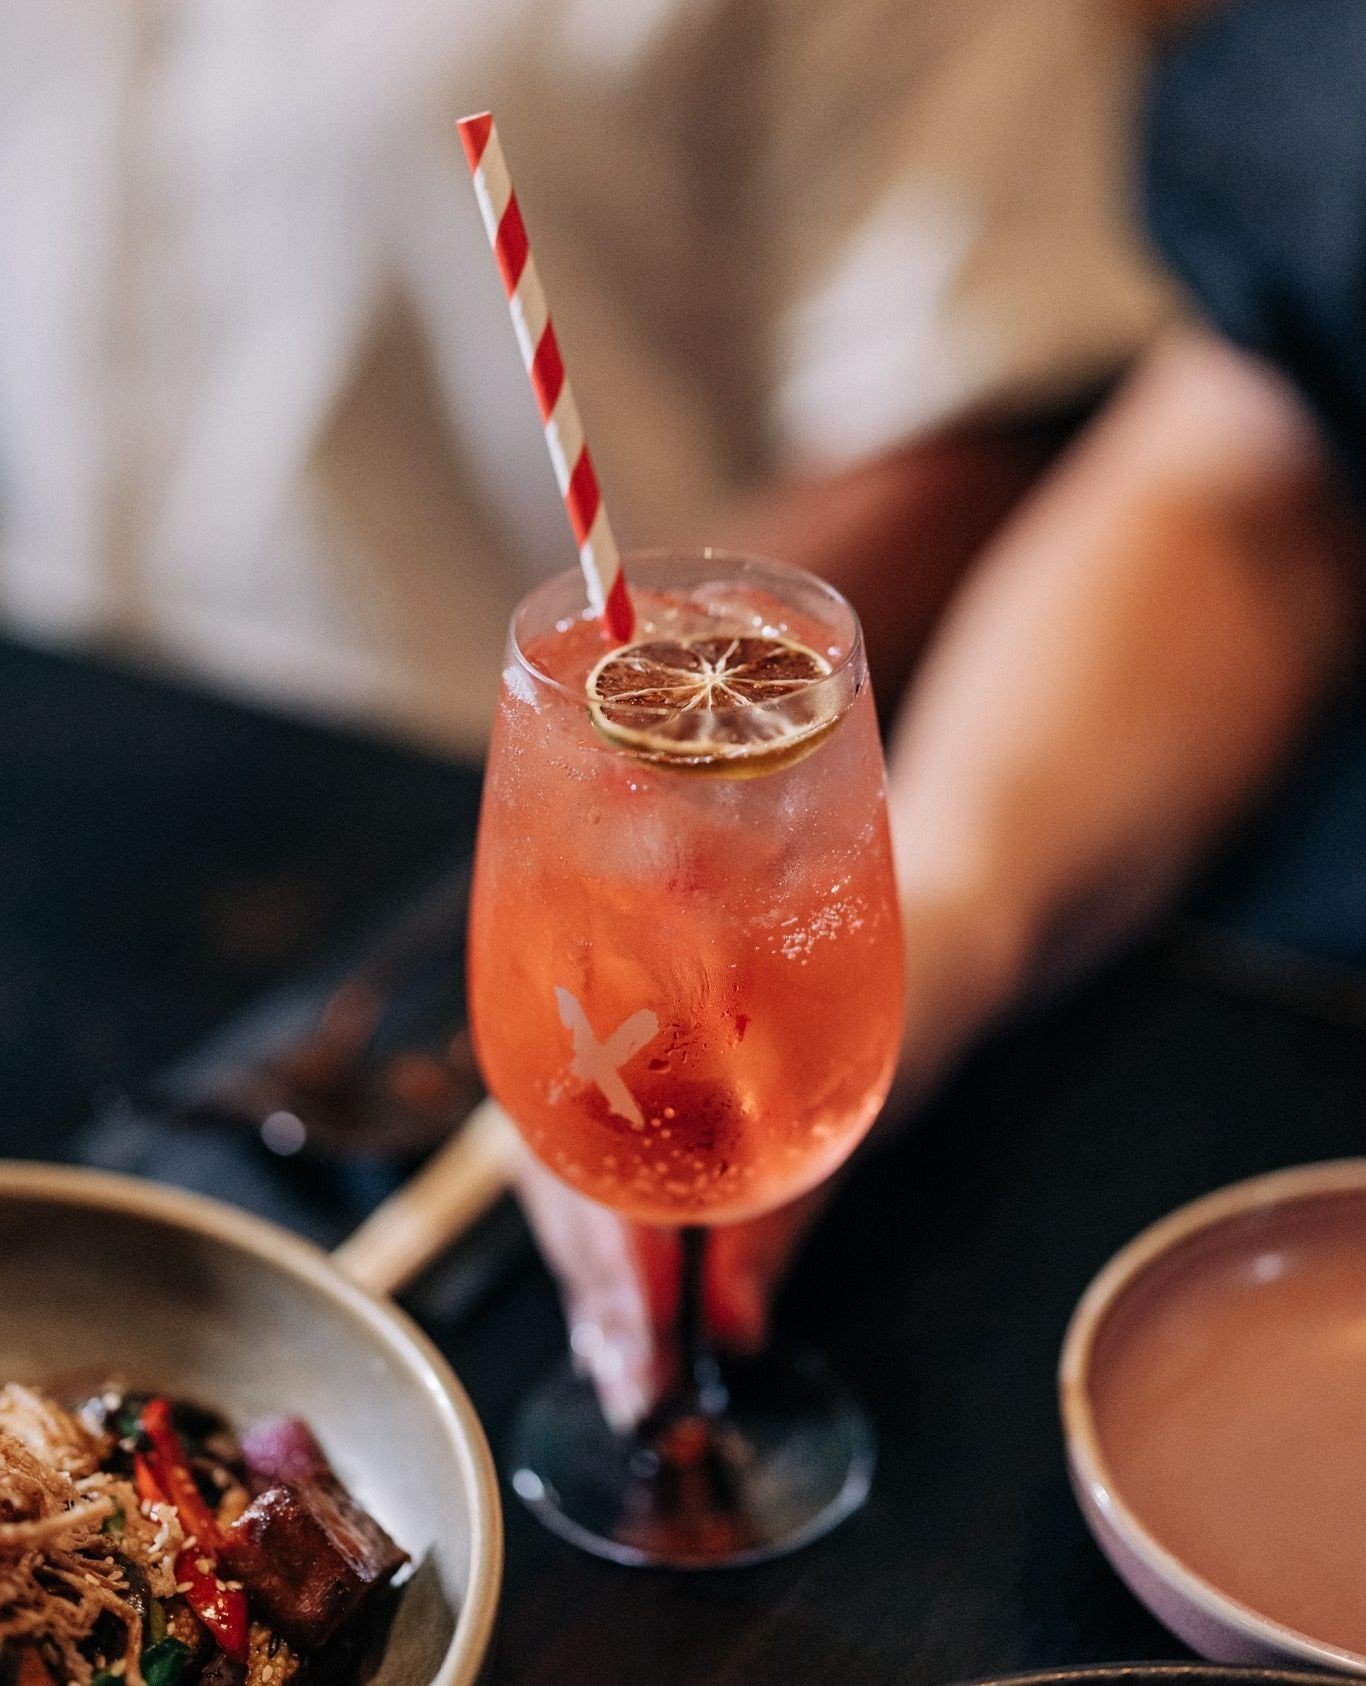 The drinks are calling your name! Looking for a way to spend your Sunday? Head in from 11.30am - 3.30pm for Sunday Lunch! Book now for your banquet menu, paired perfectly with a 1.5hr drinks package. We&rsquo;ll see you later! 🥢🍸🥟 #gingermegsx